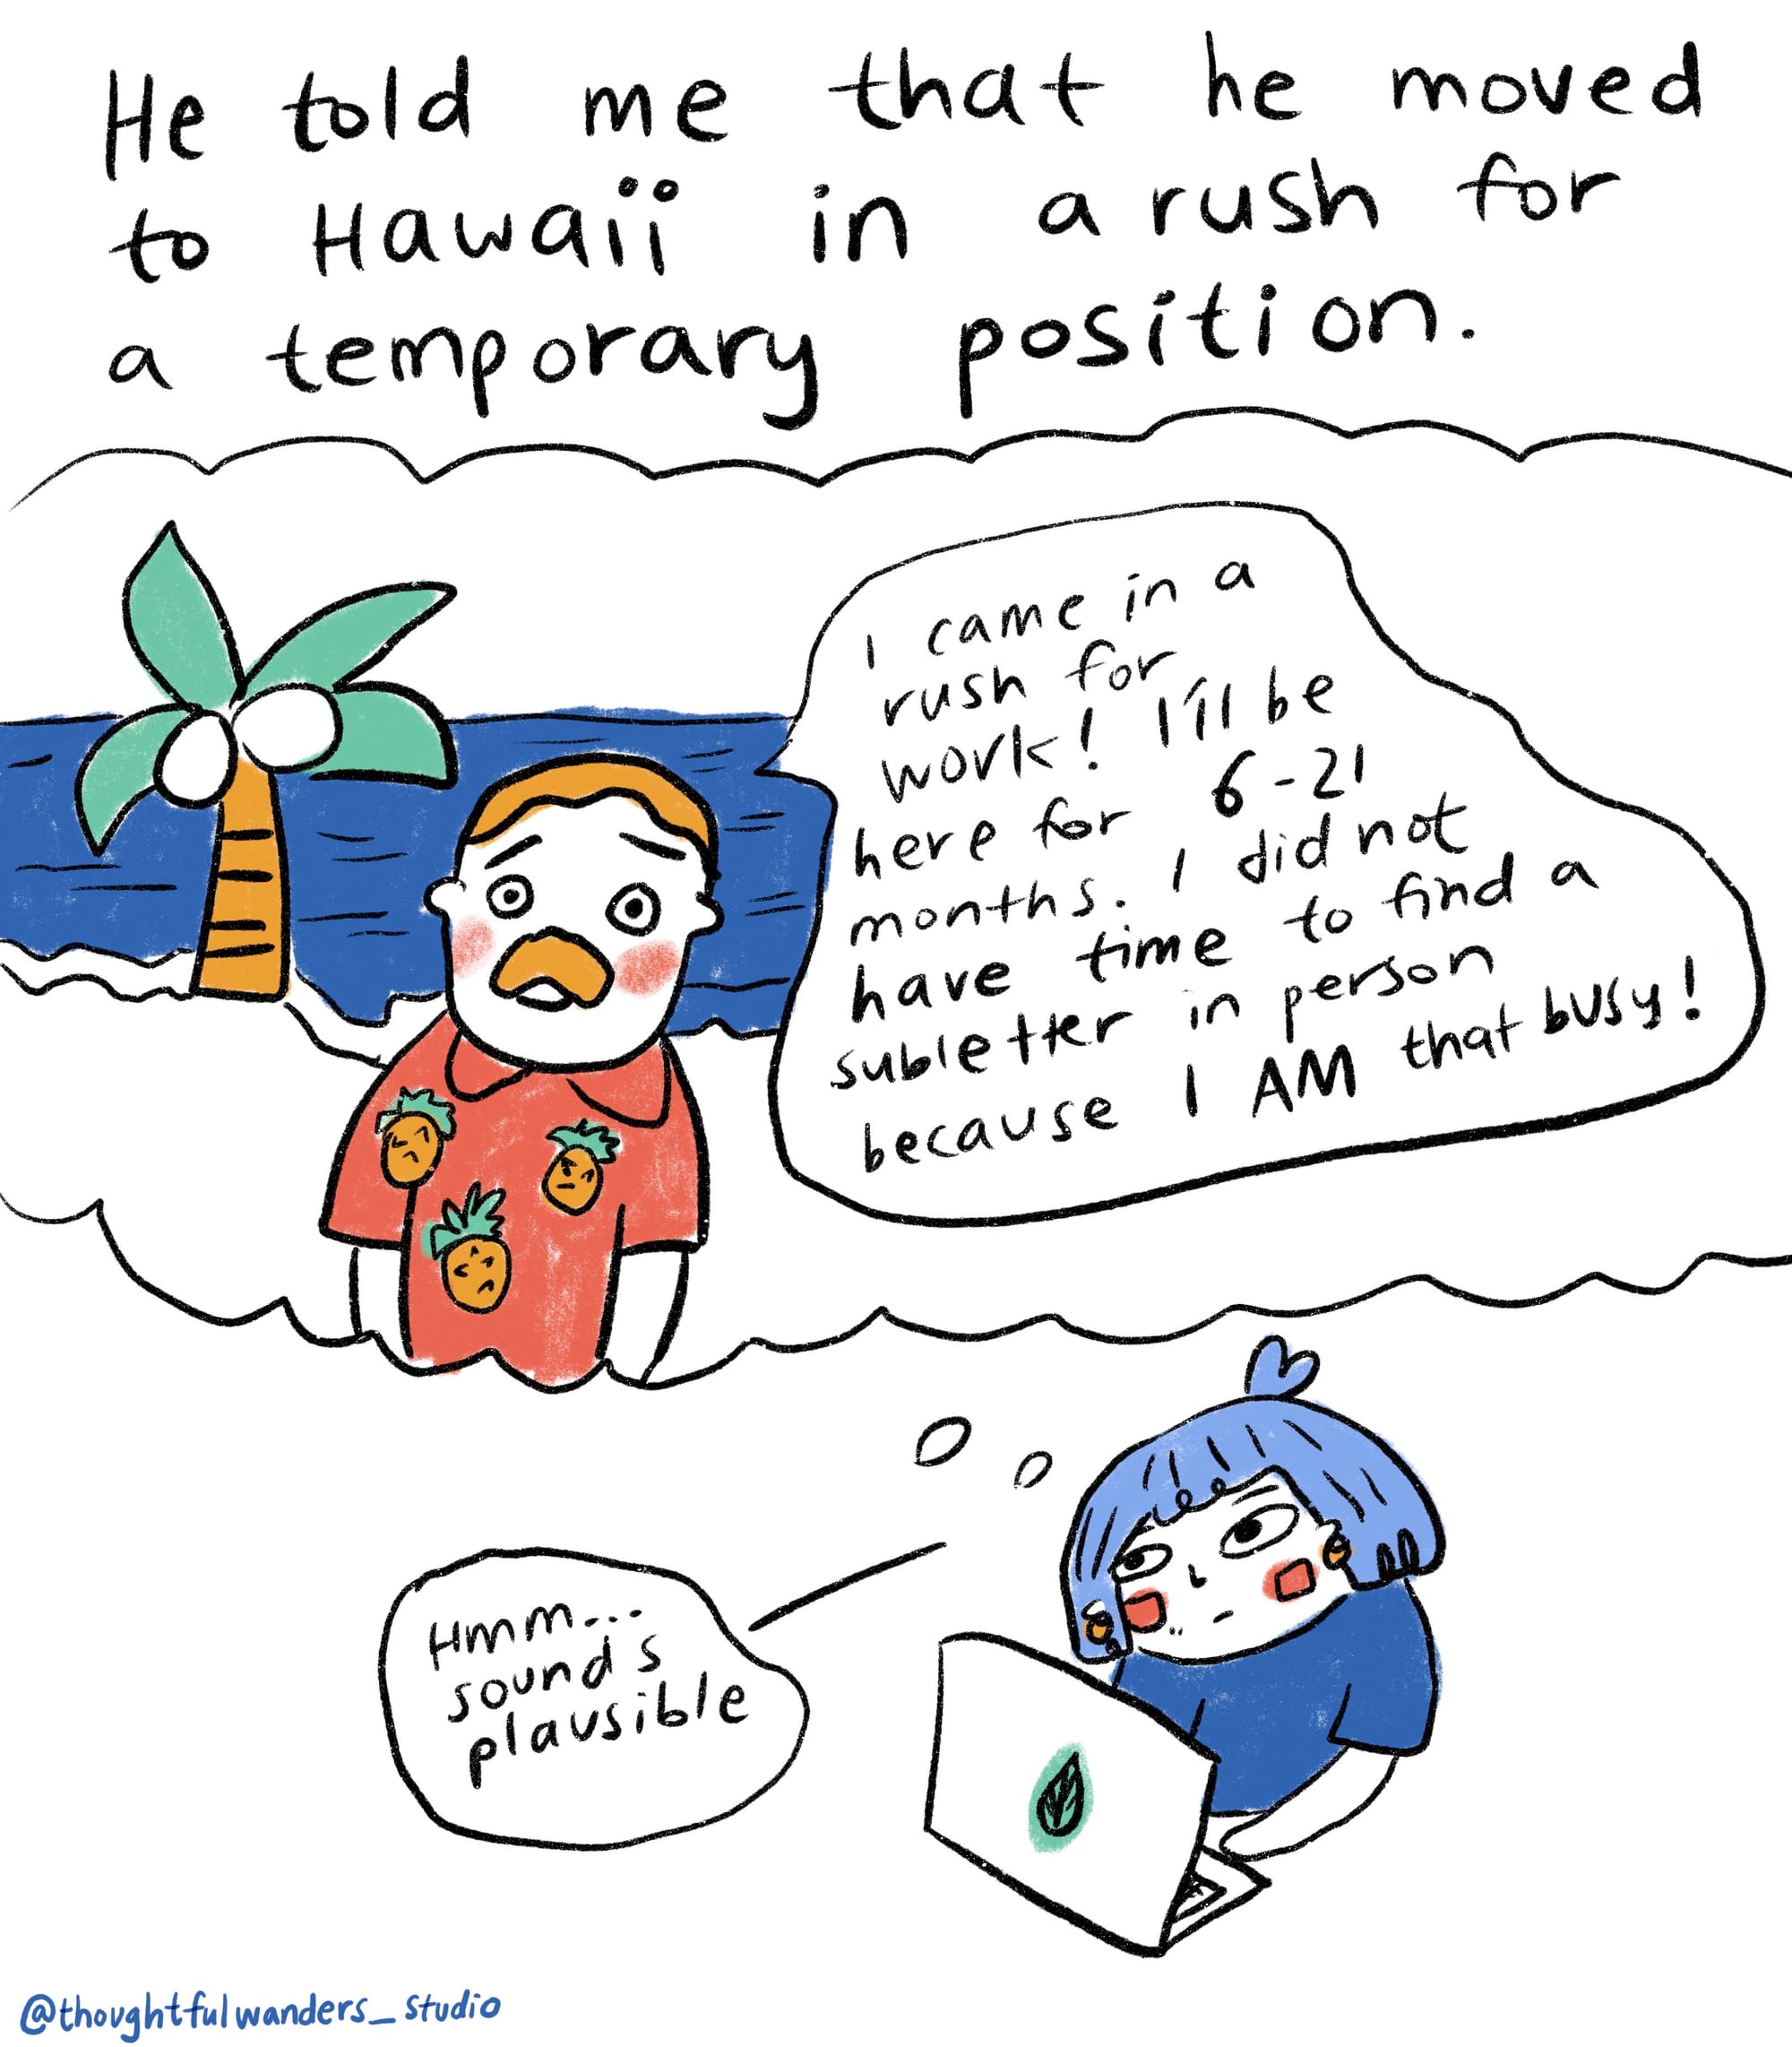 He told me that he moved to Hawaii in a rush for a temporary position... white guy in a hawaii shirt saying "i came in a rush for work! i'll be here for 6-21 months. i did not have time to find a subletter in person because I AM that busy!" me with a thought bubble "hmm...sounds plausible" 